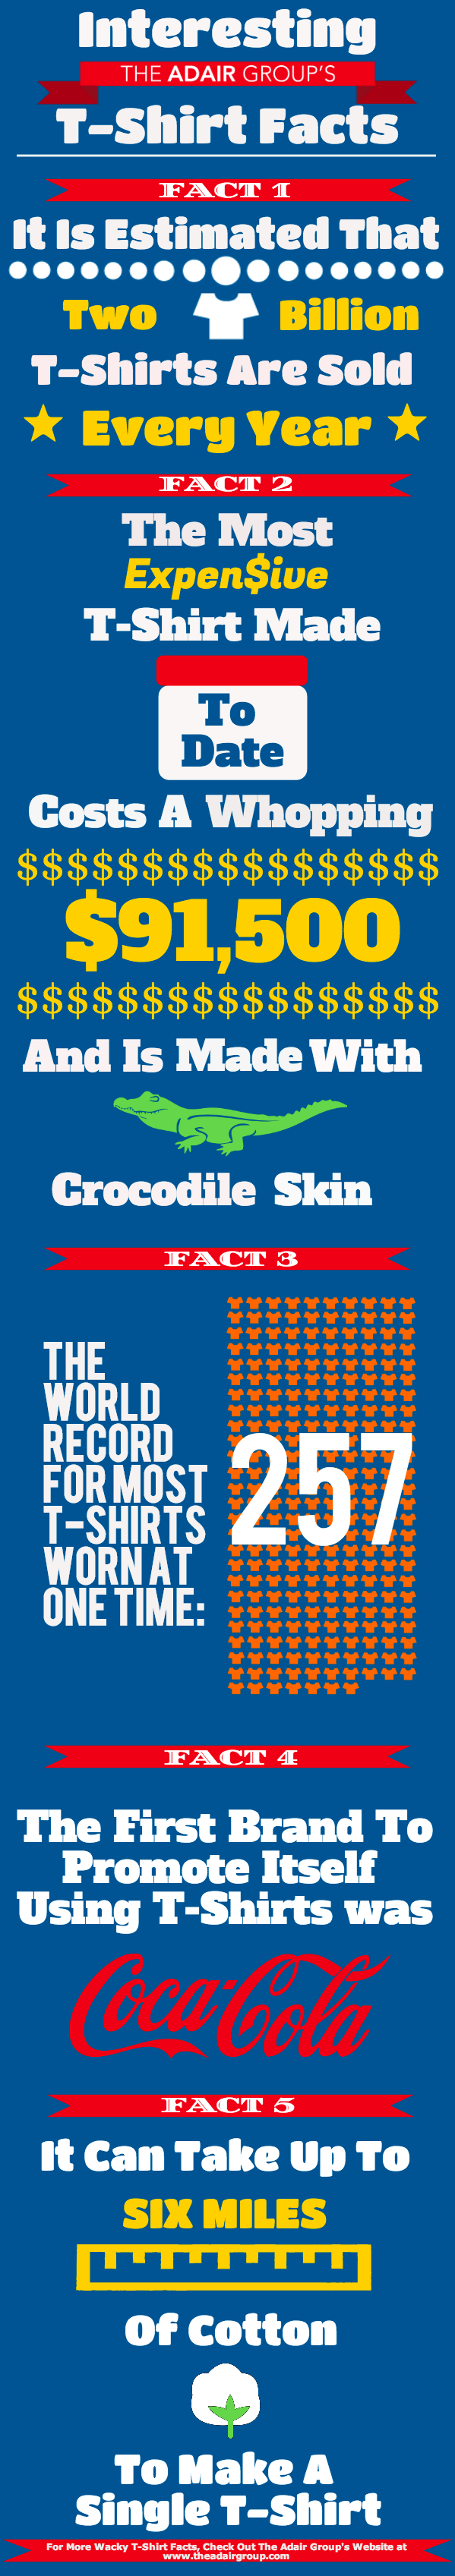 Fun and interesting t-shirt facts from The Adair Group.